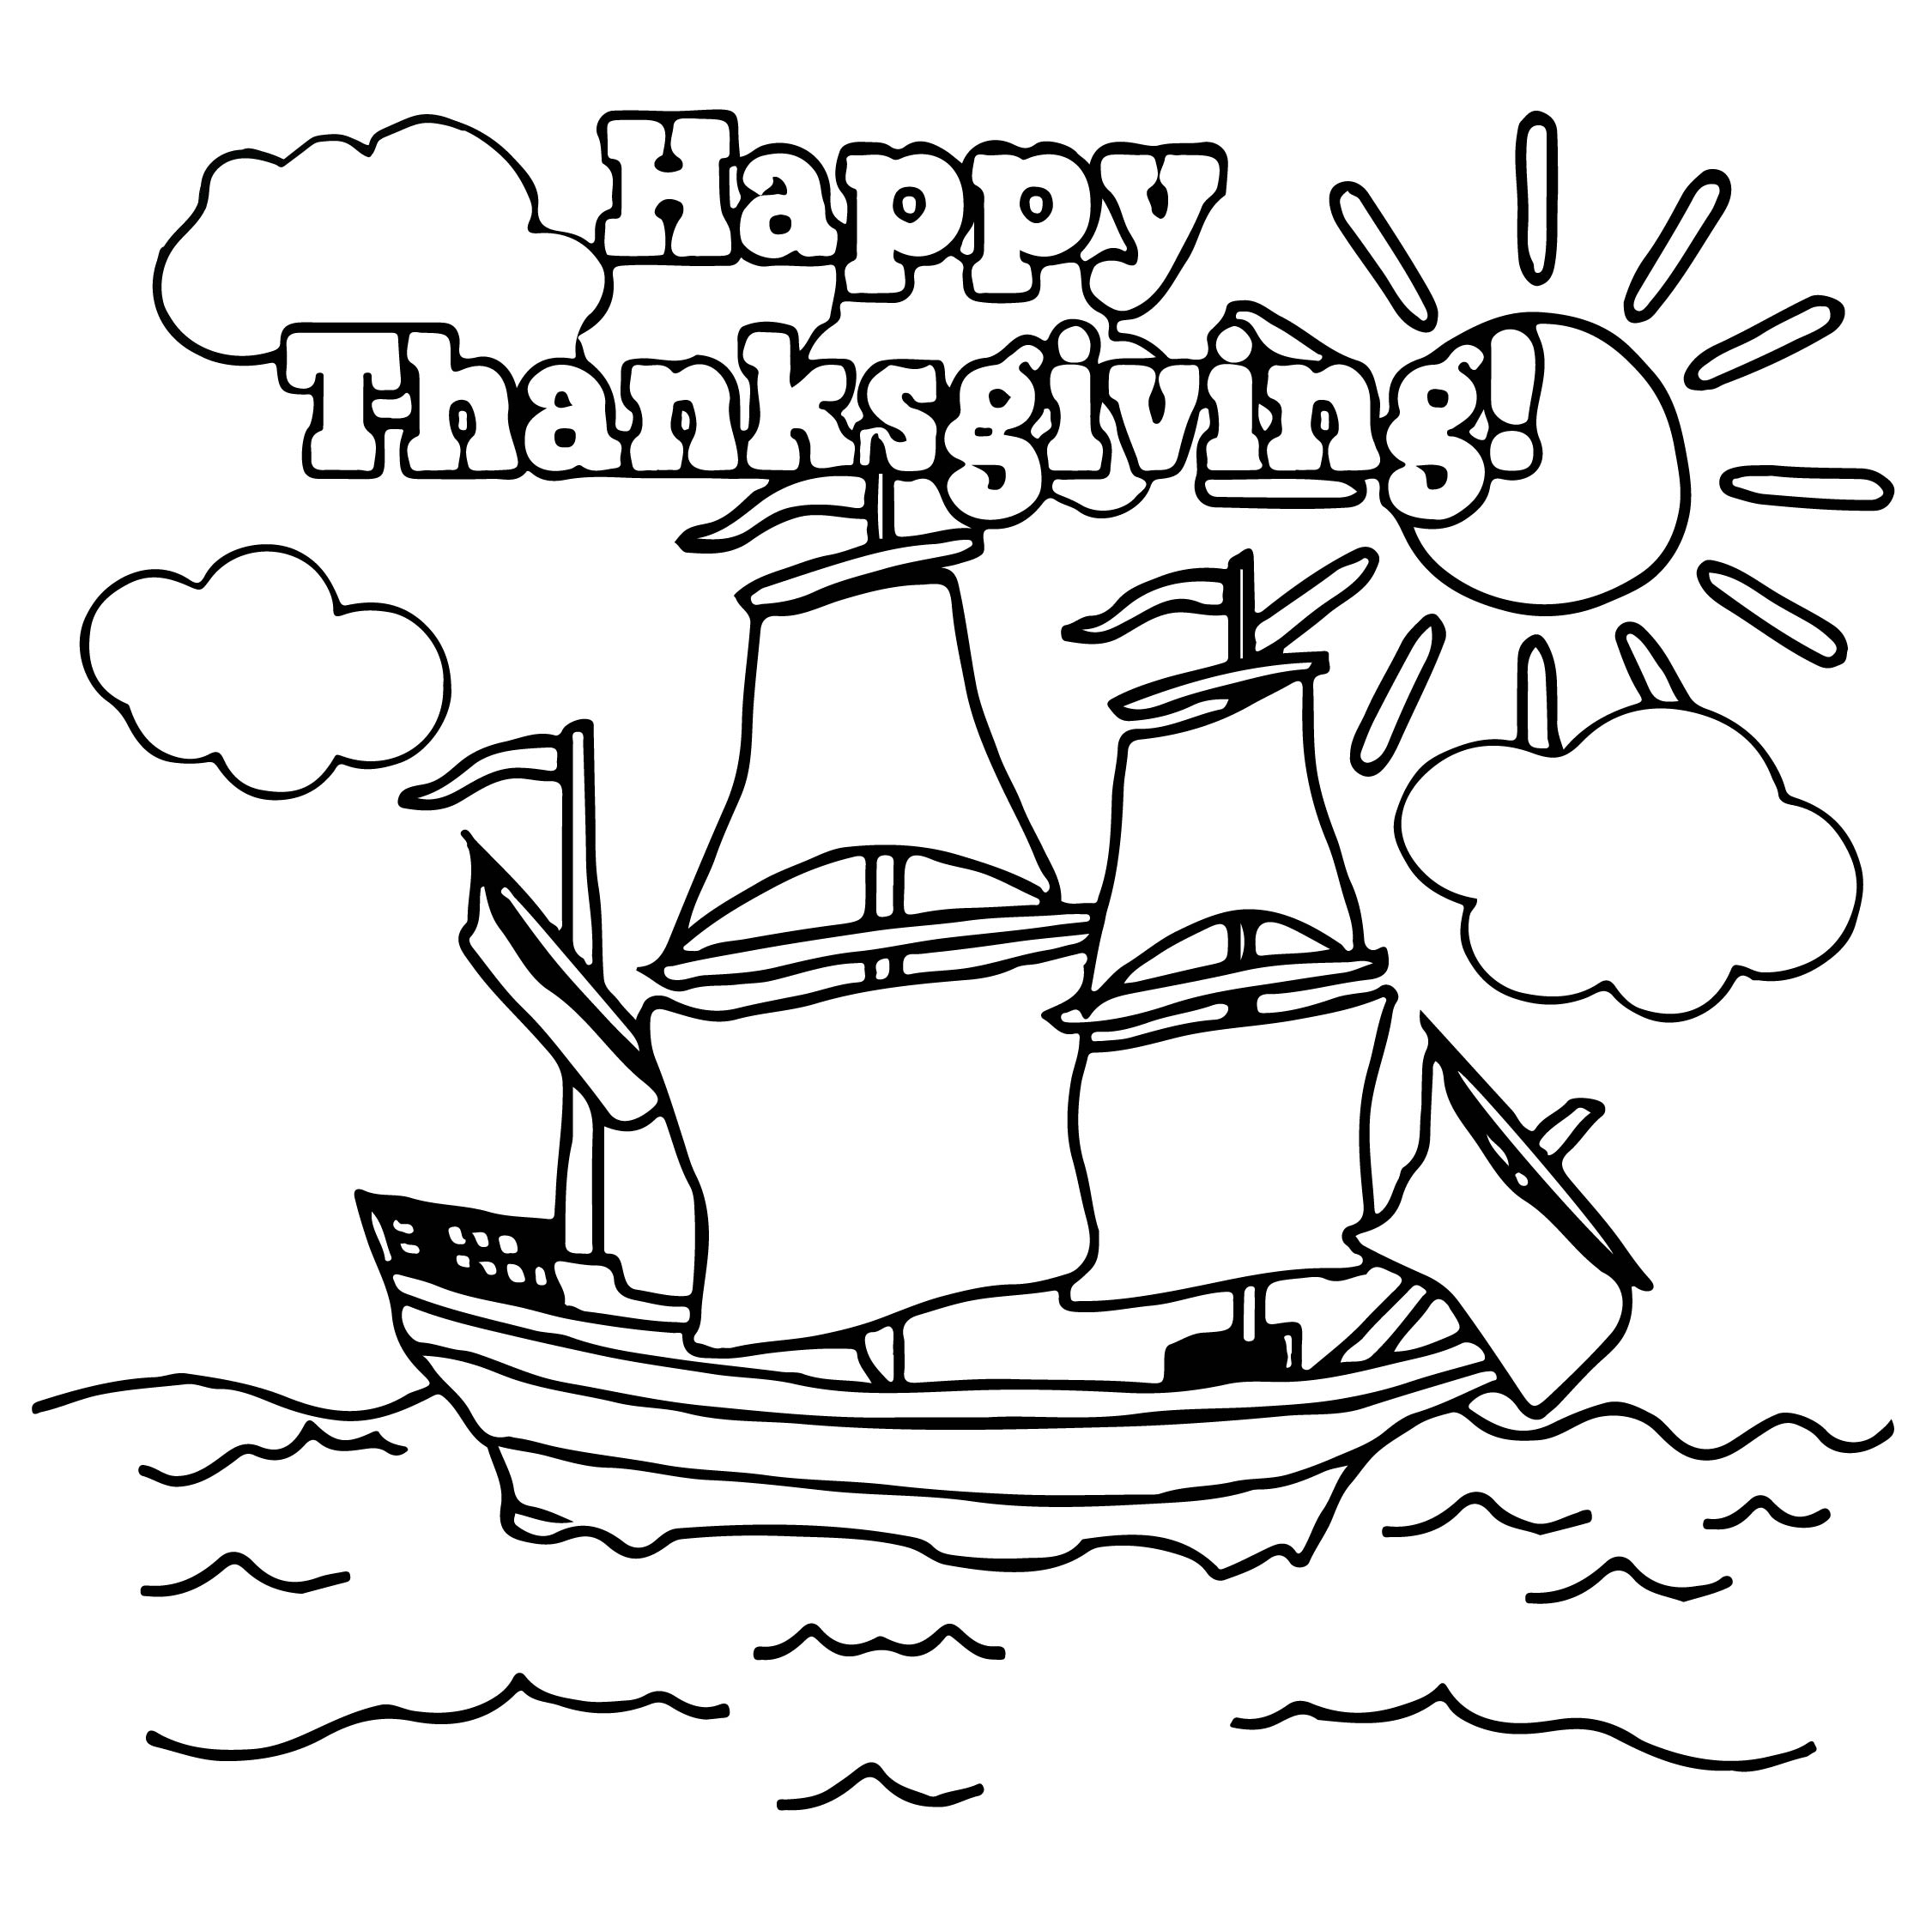 7-best-images-of-happy-thanksgiving-free-printable-templates